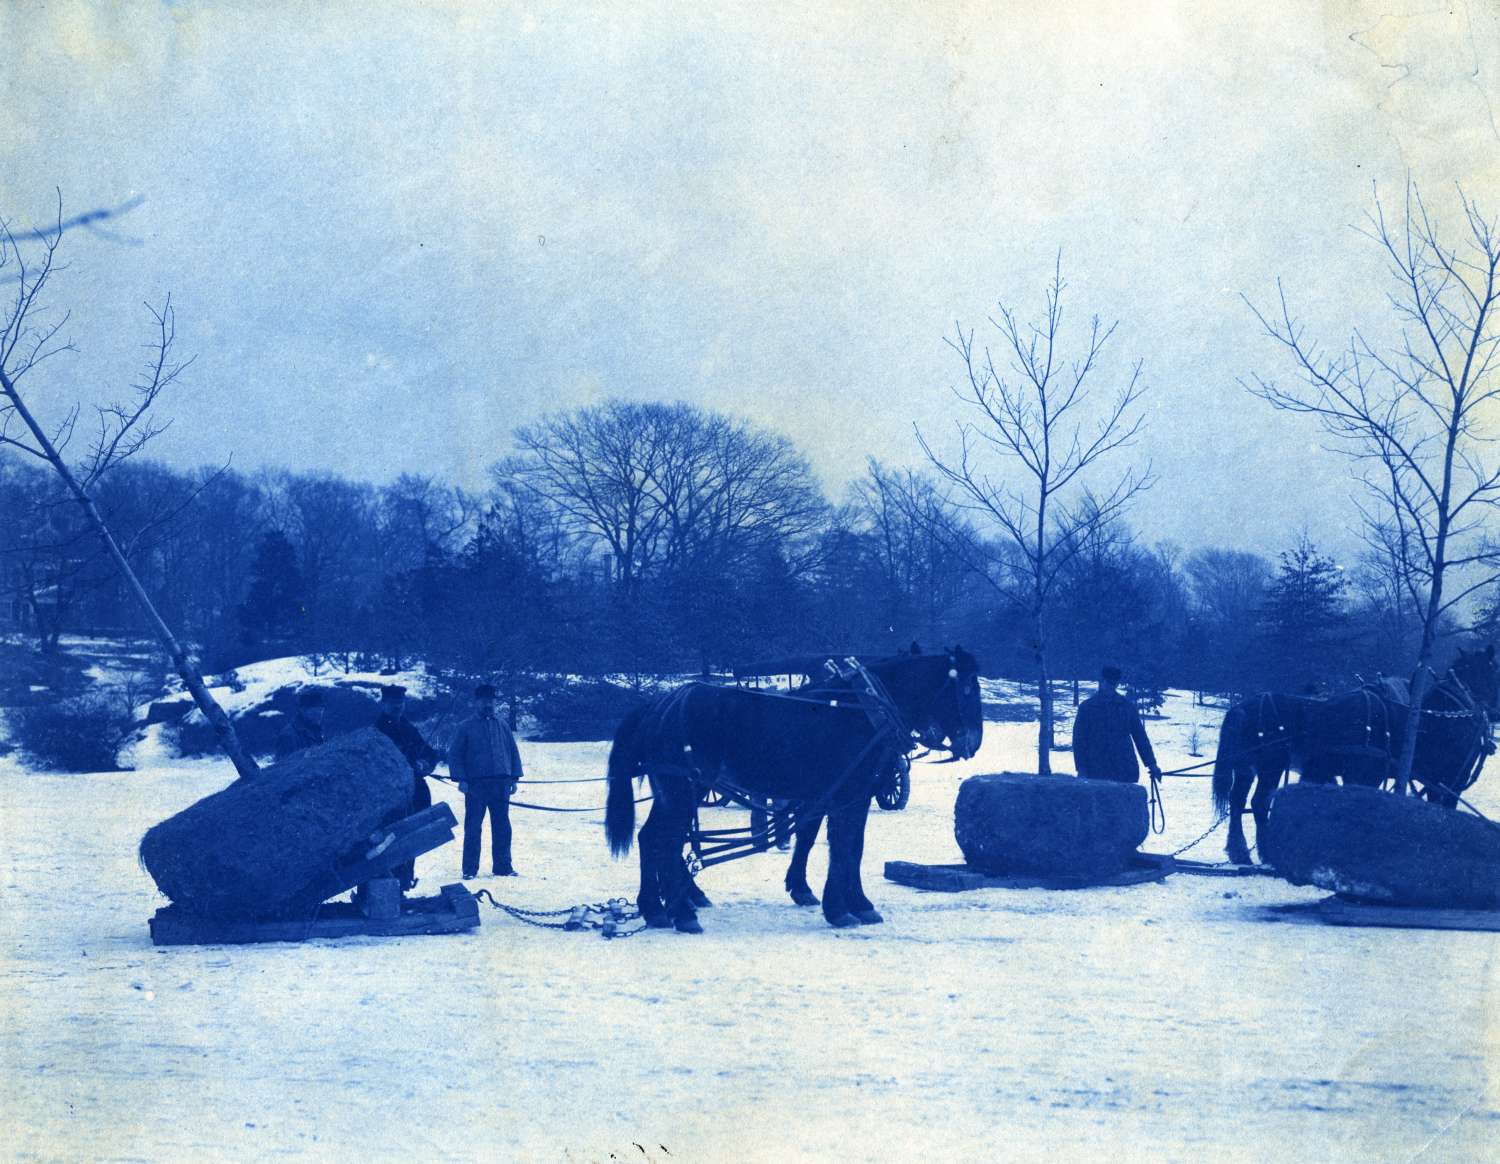   A cyanotype shows draft horses being used to transport trees by sled for planting. Possibly Franklin Park or Arnold Arboretum. Courtesy of Greg French. 